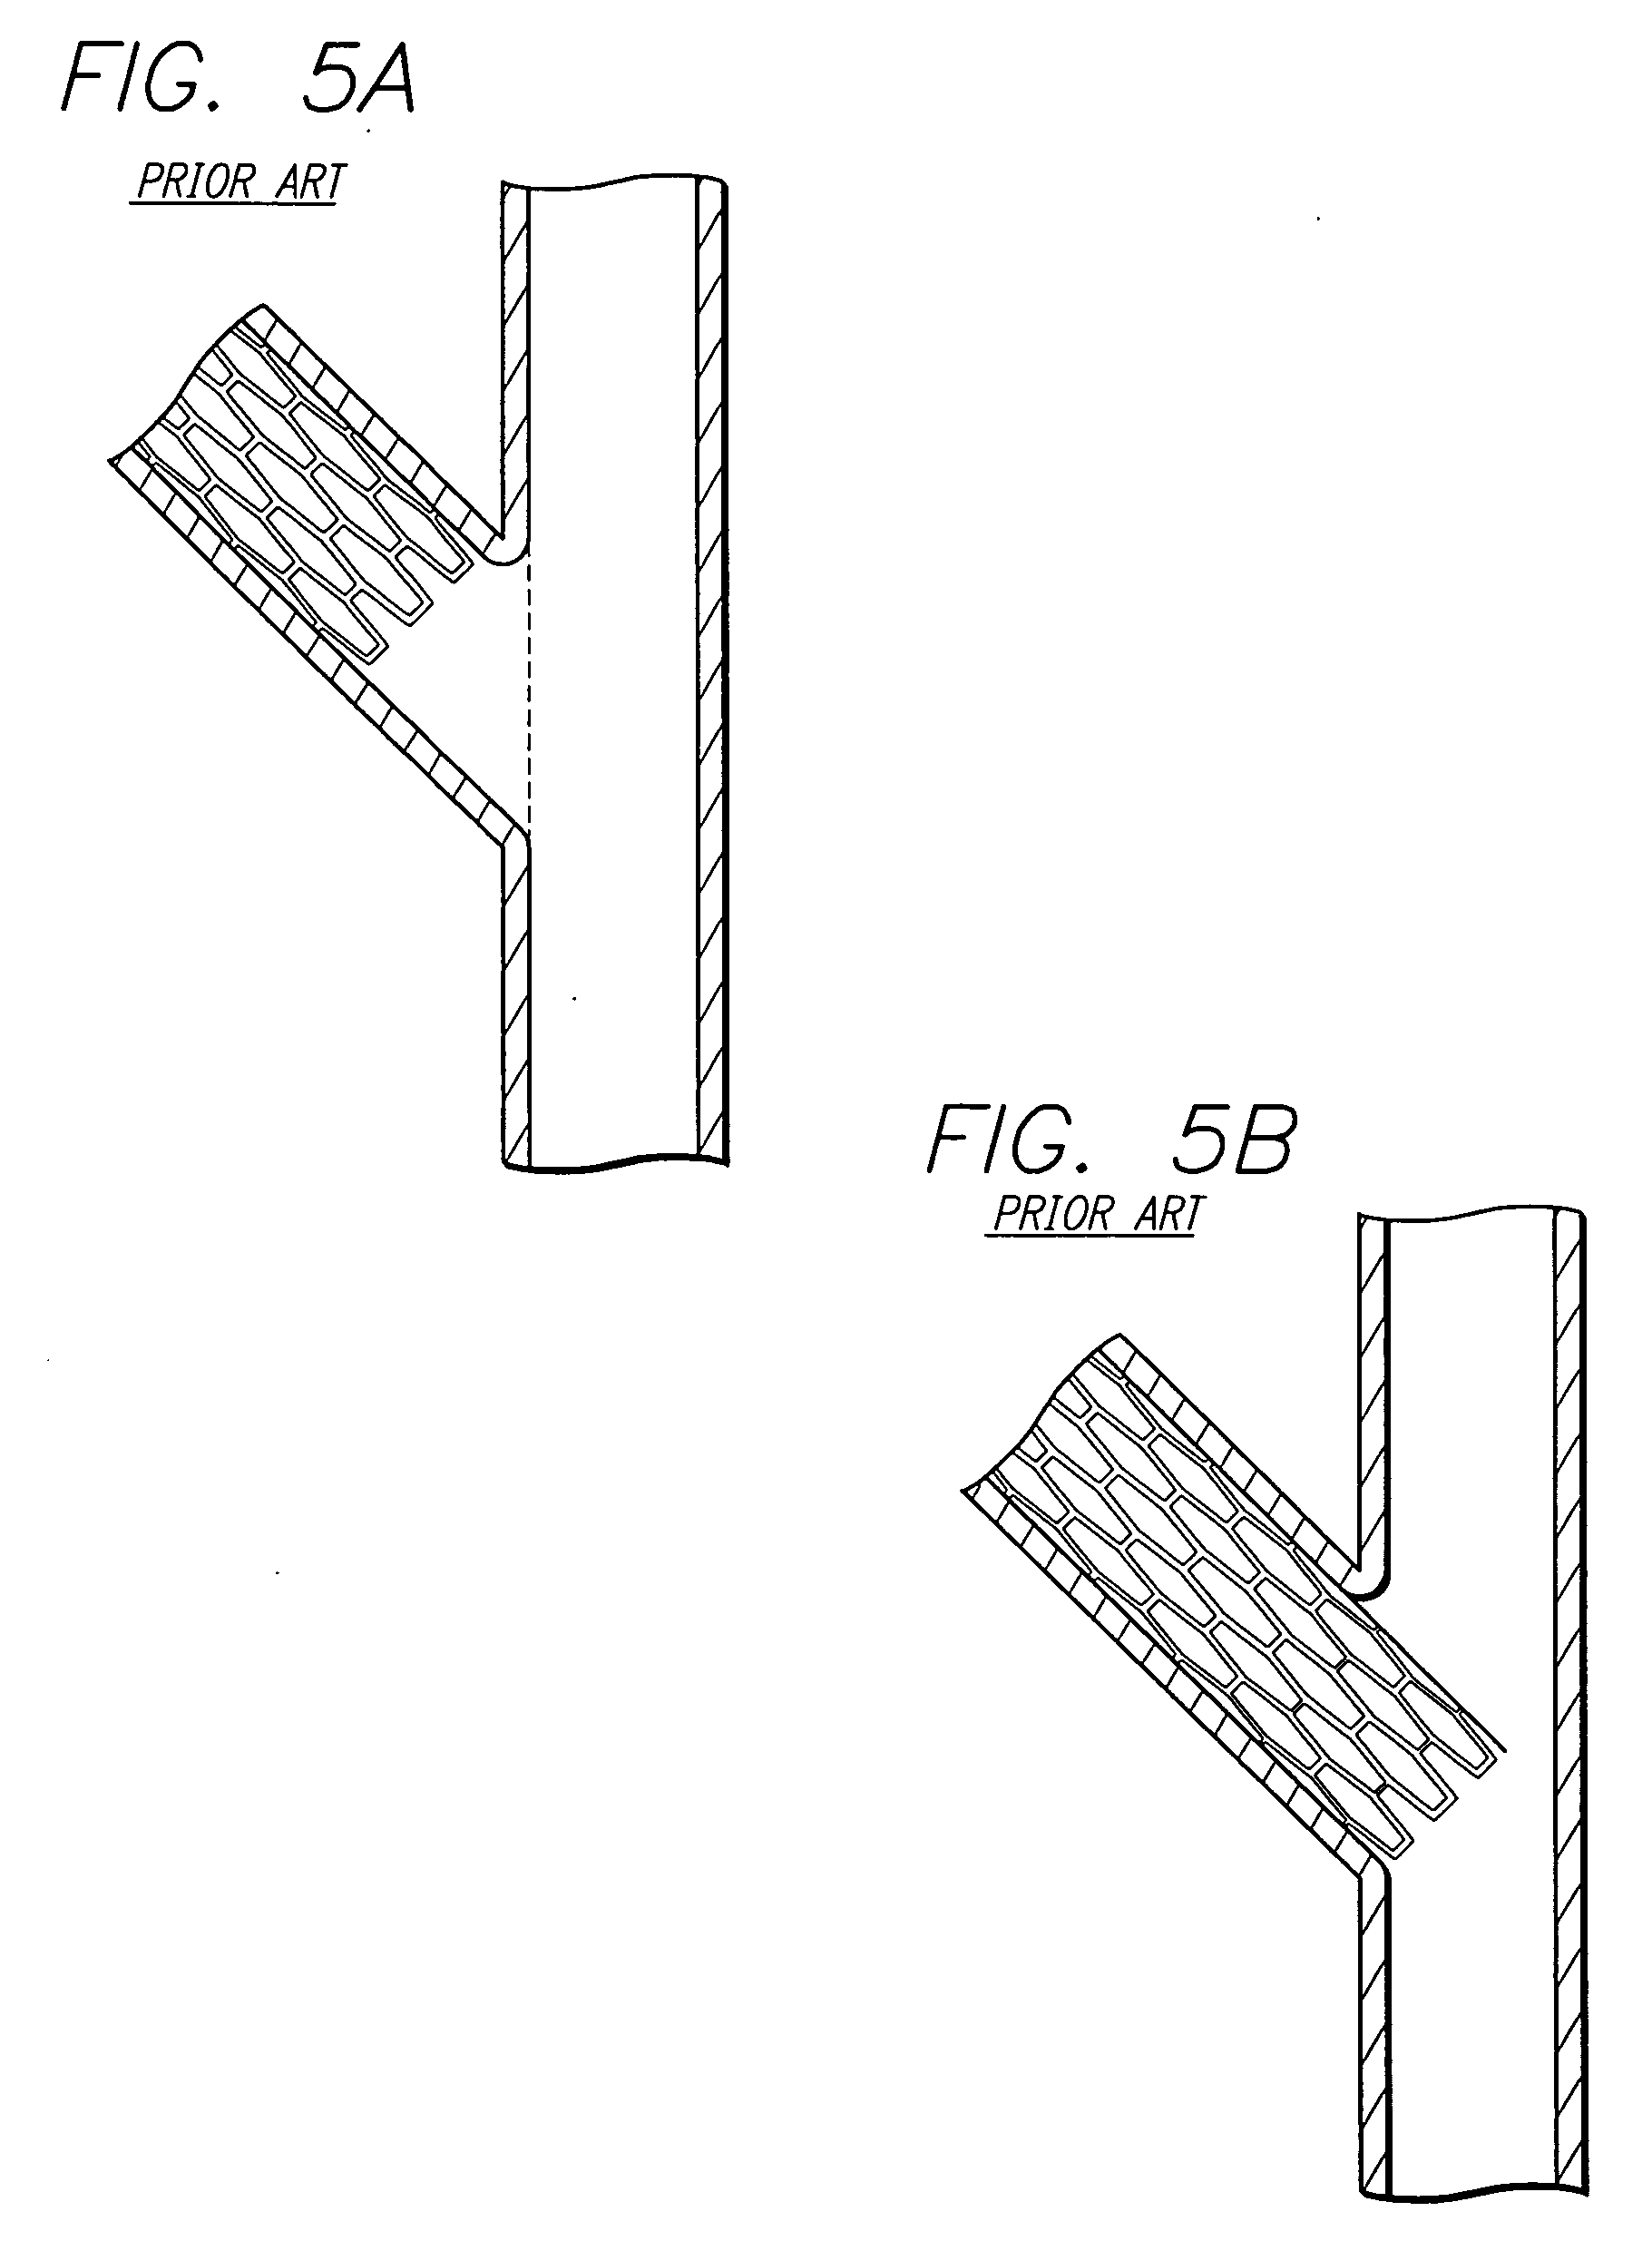 Catheter assembly and method for treating bifurcations